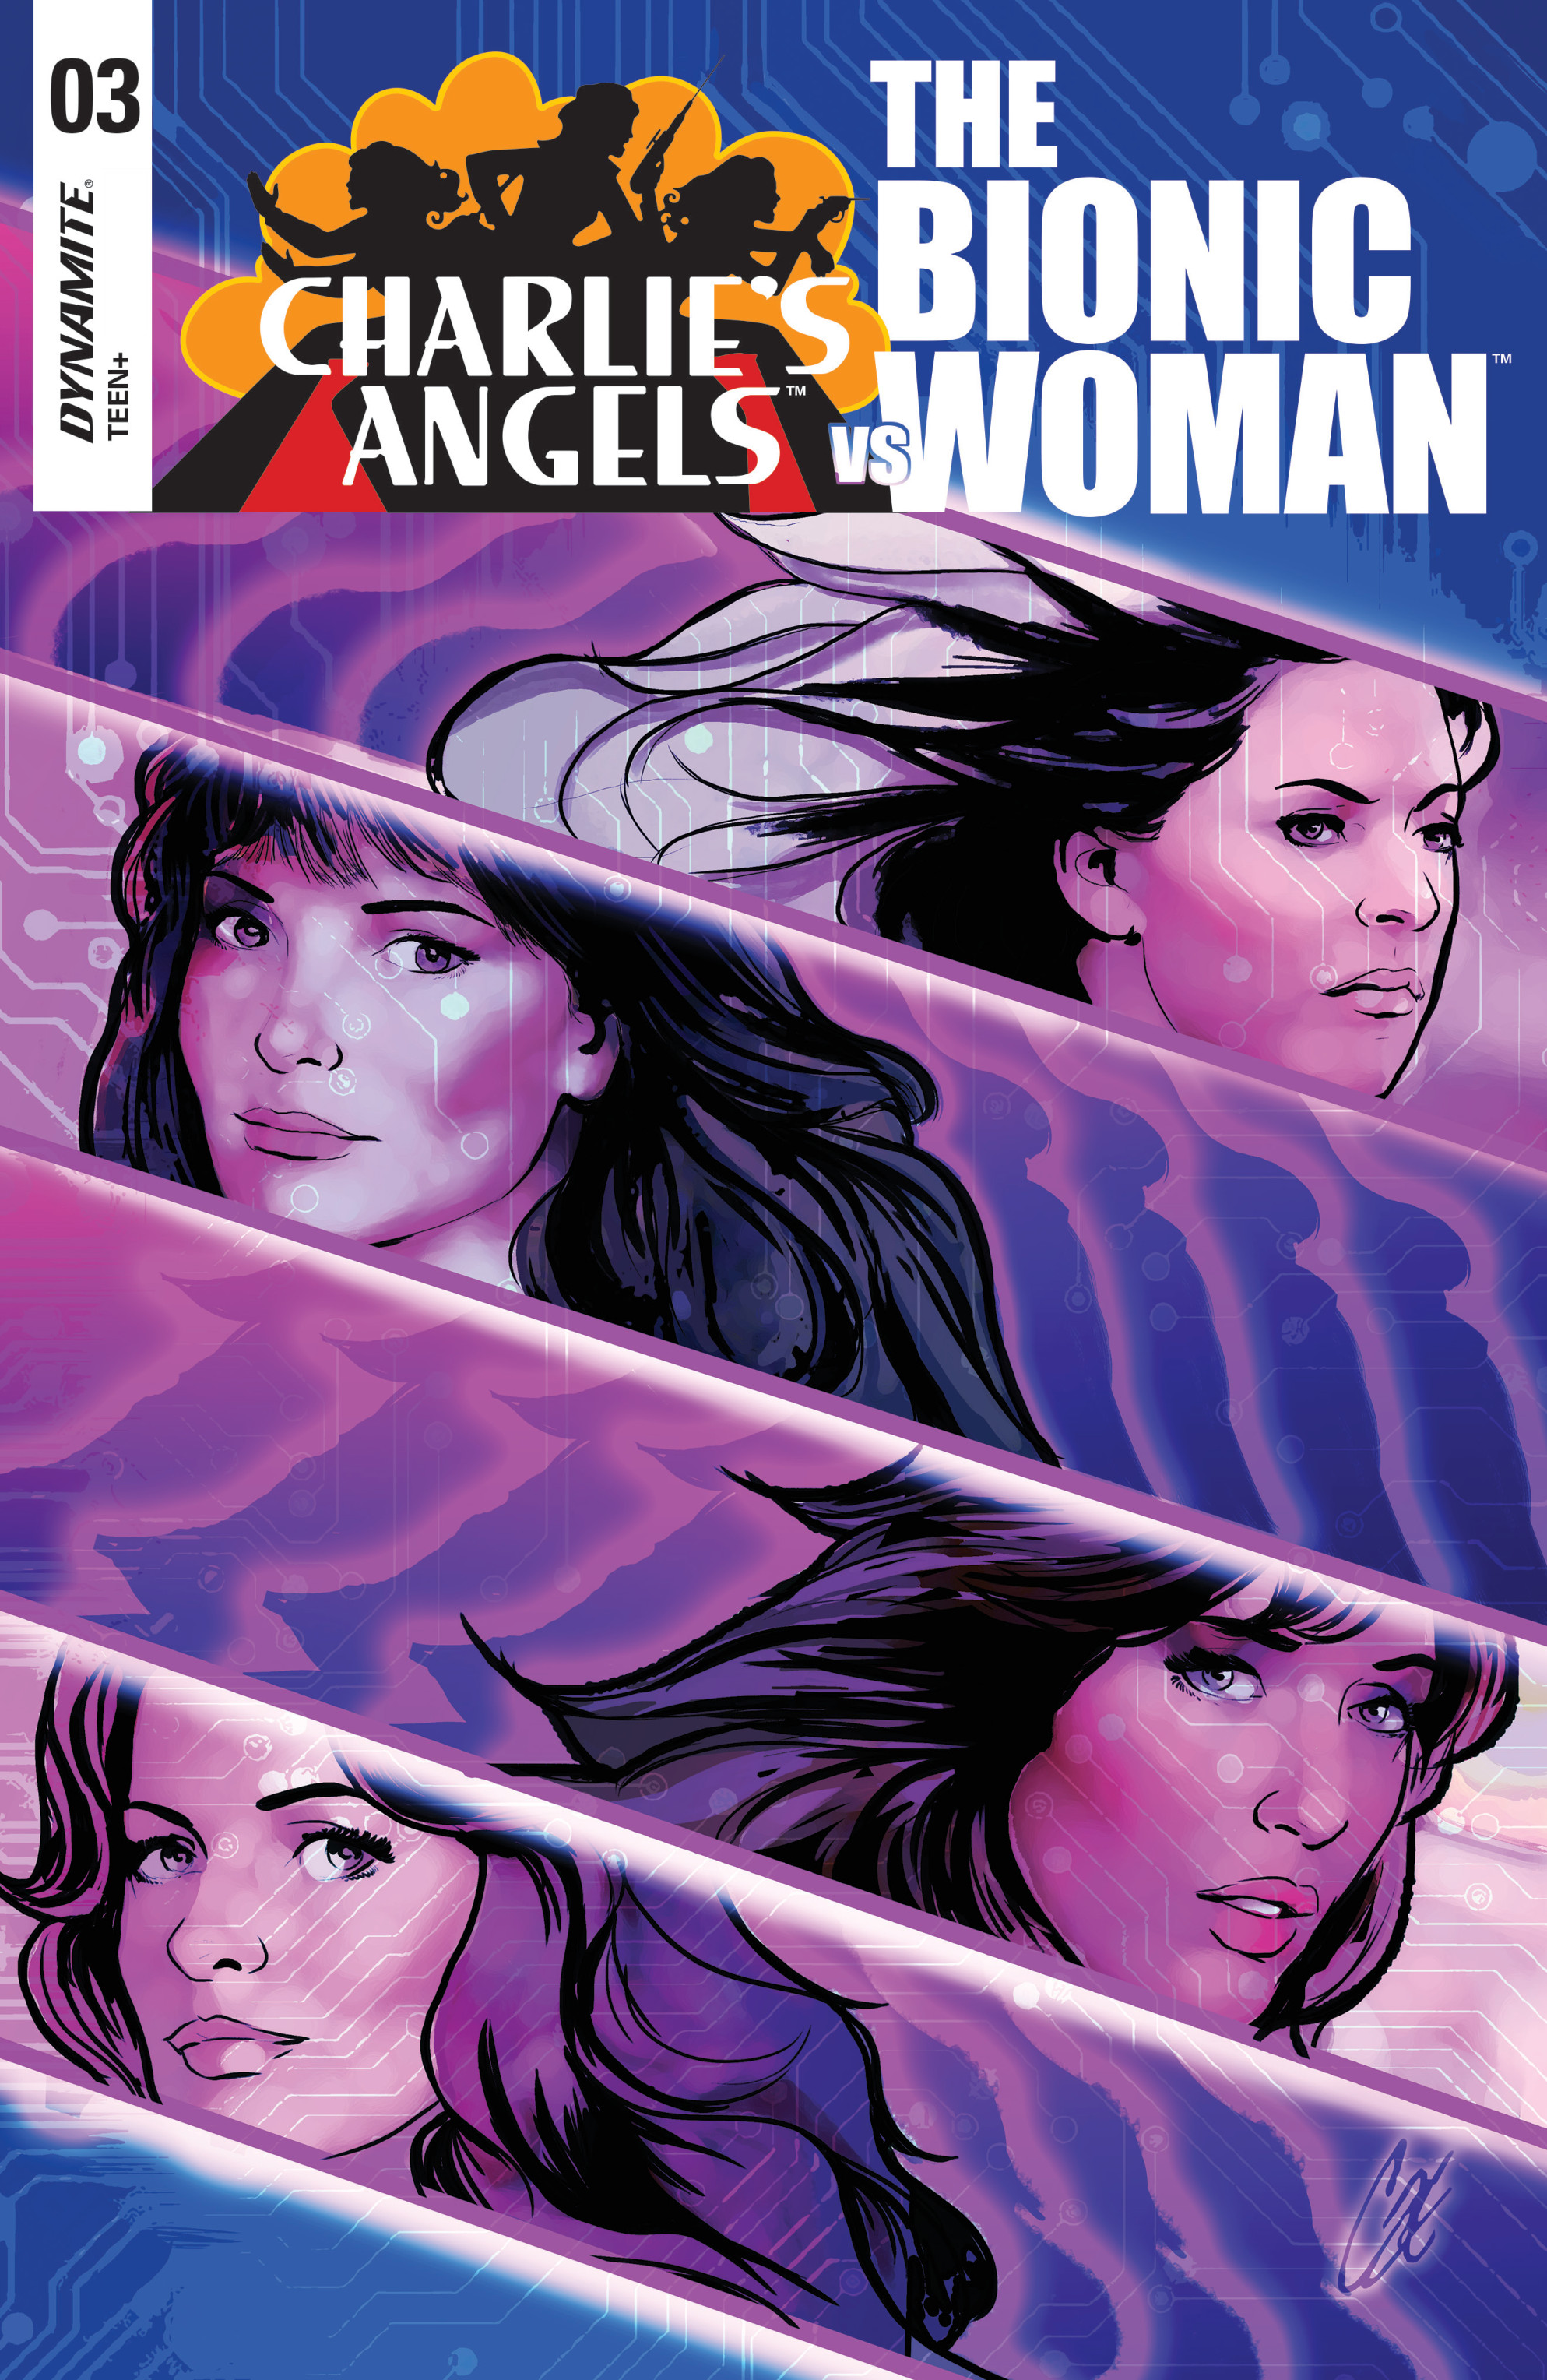 Charlie's Angels vs. The Bionic Woman (2019-): Chapter 3 - Page 1